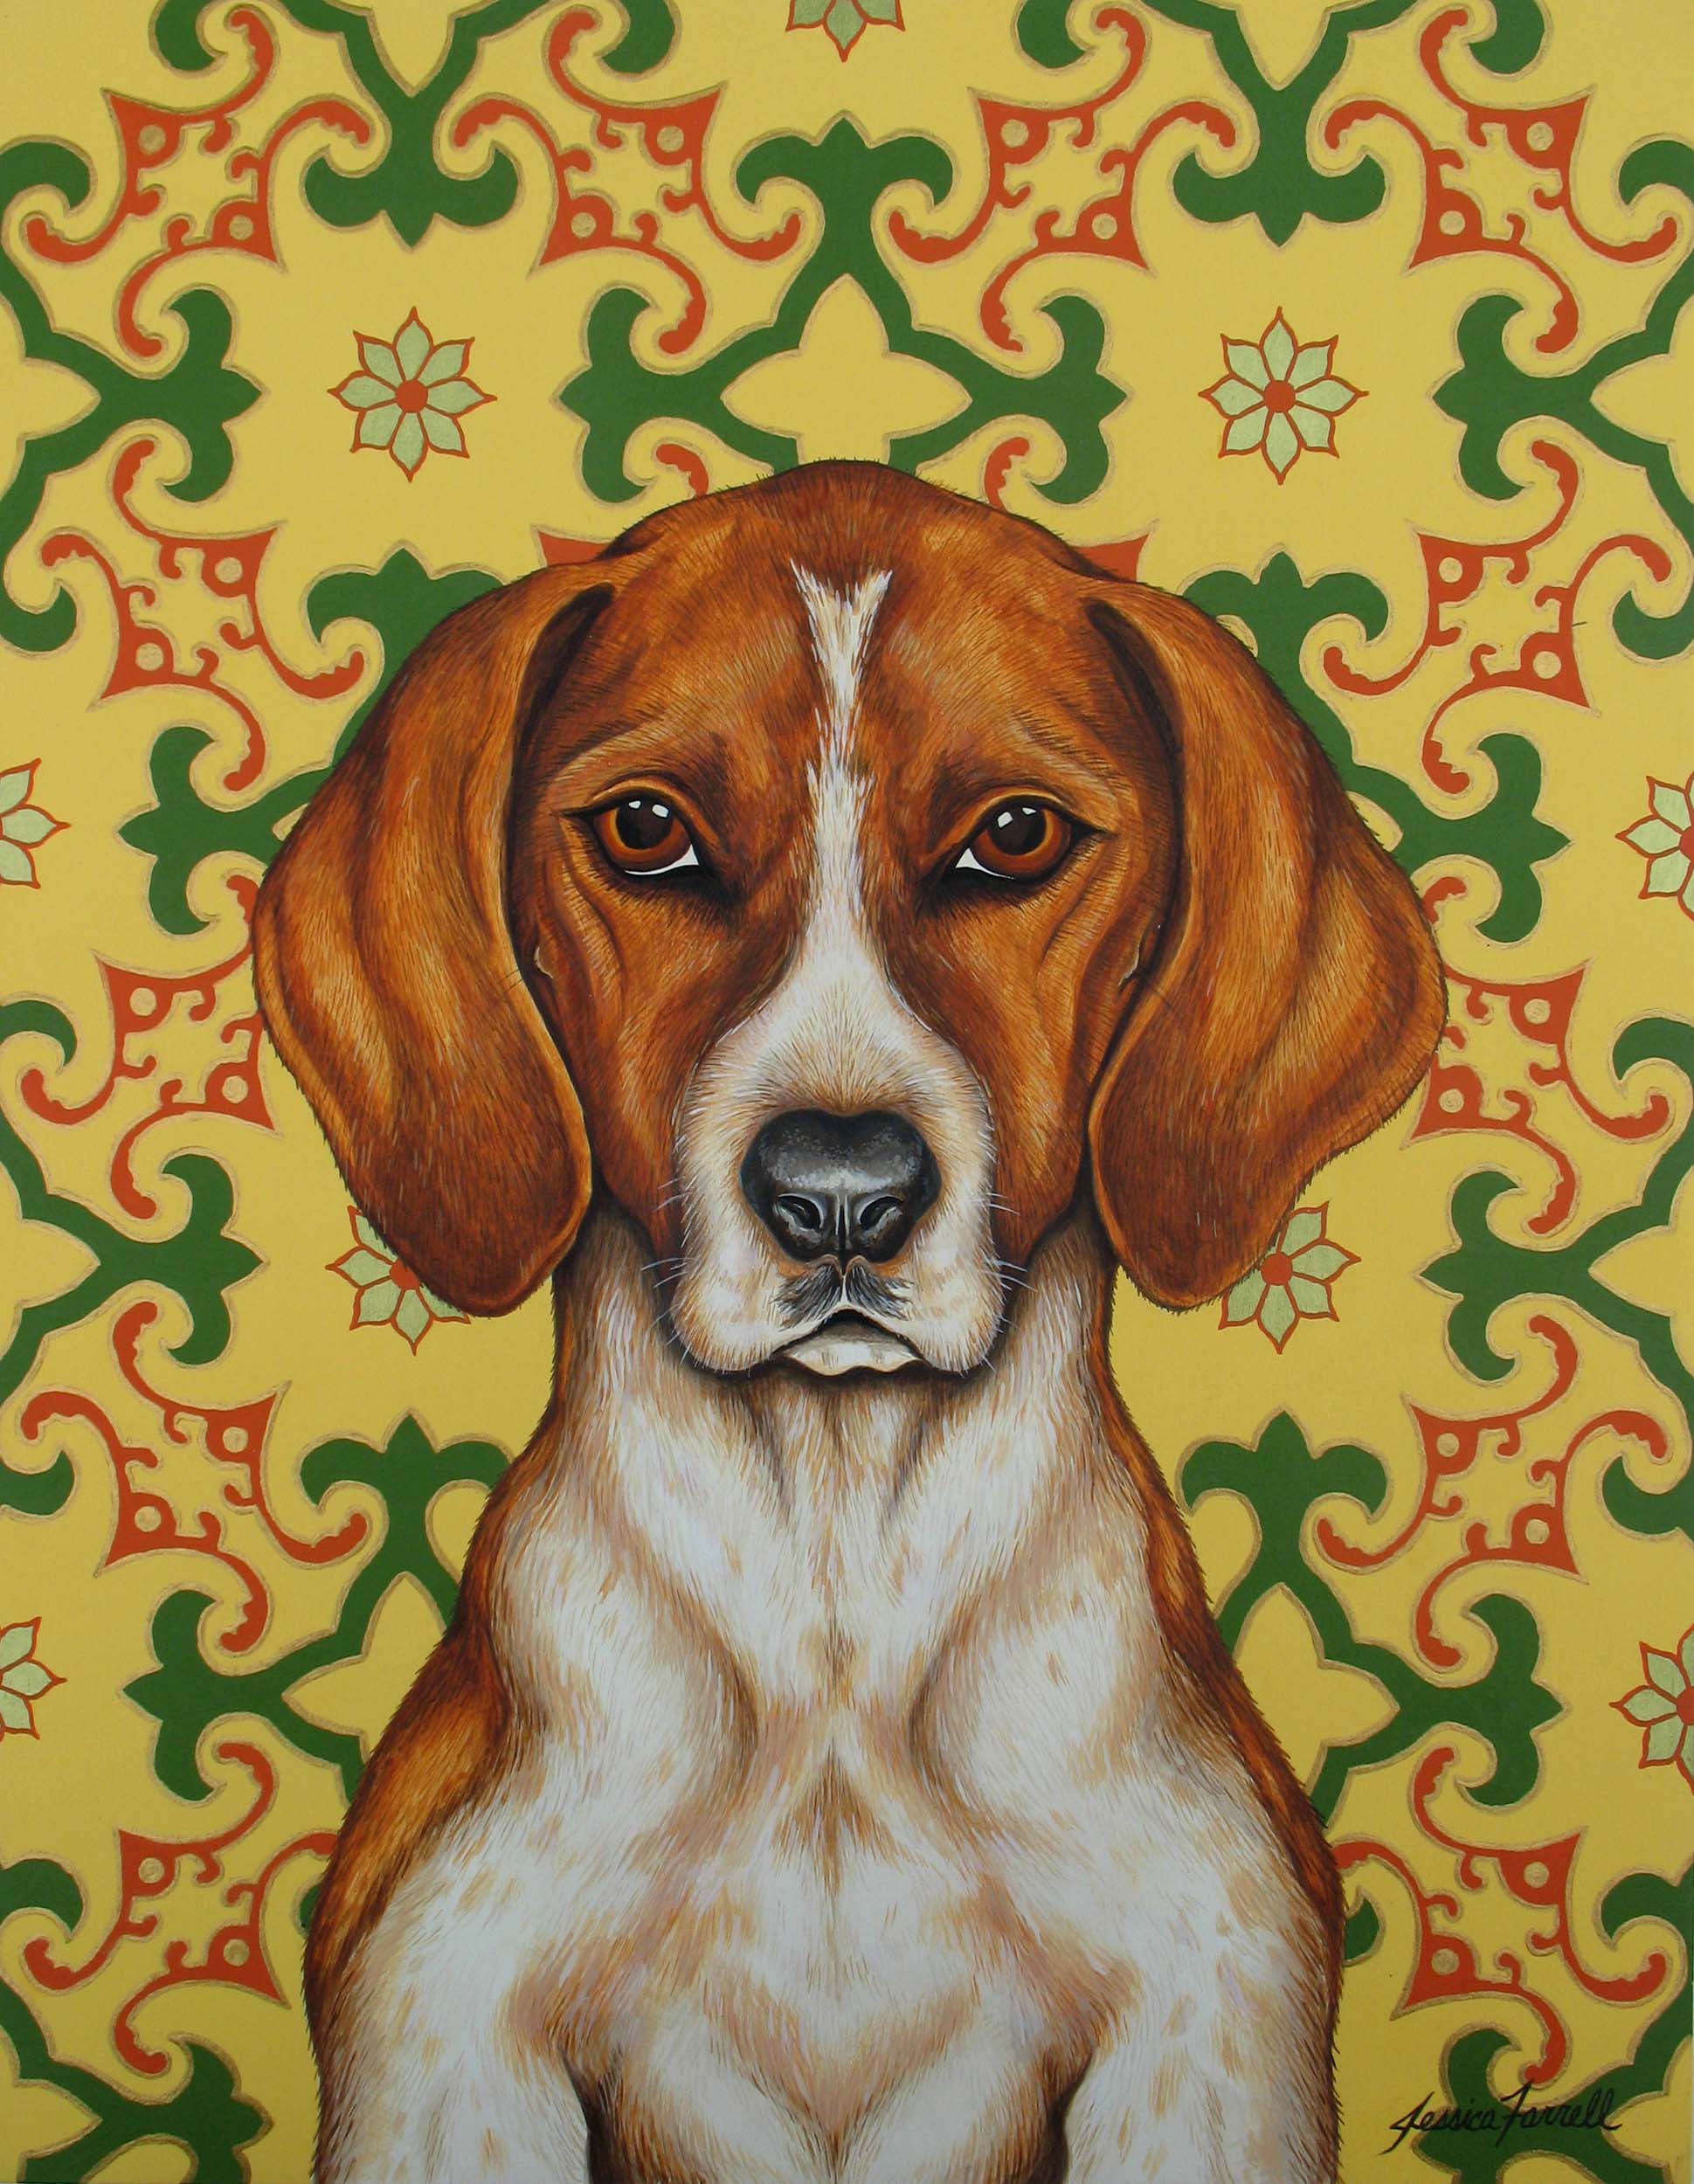   Bernard , Acrylic on wood, 18 x 14 inches  (private collection) 